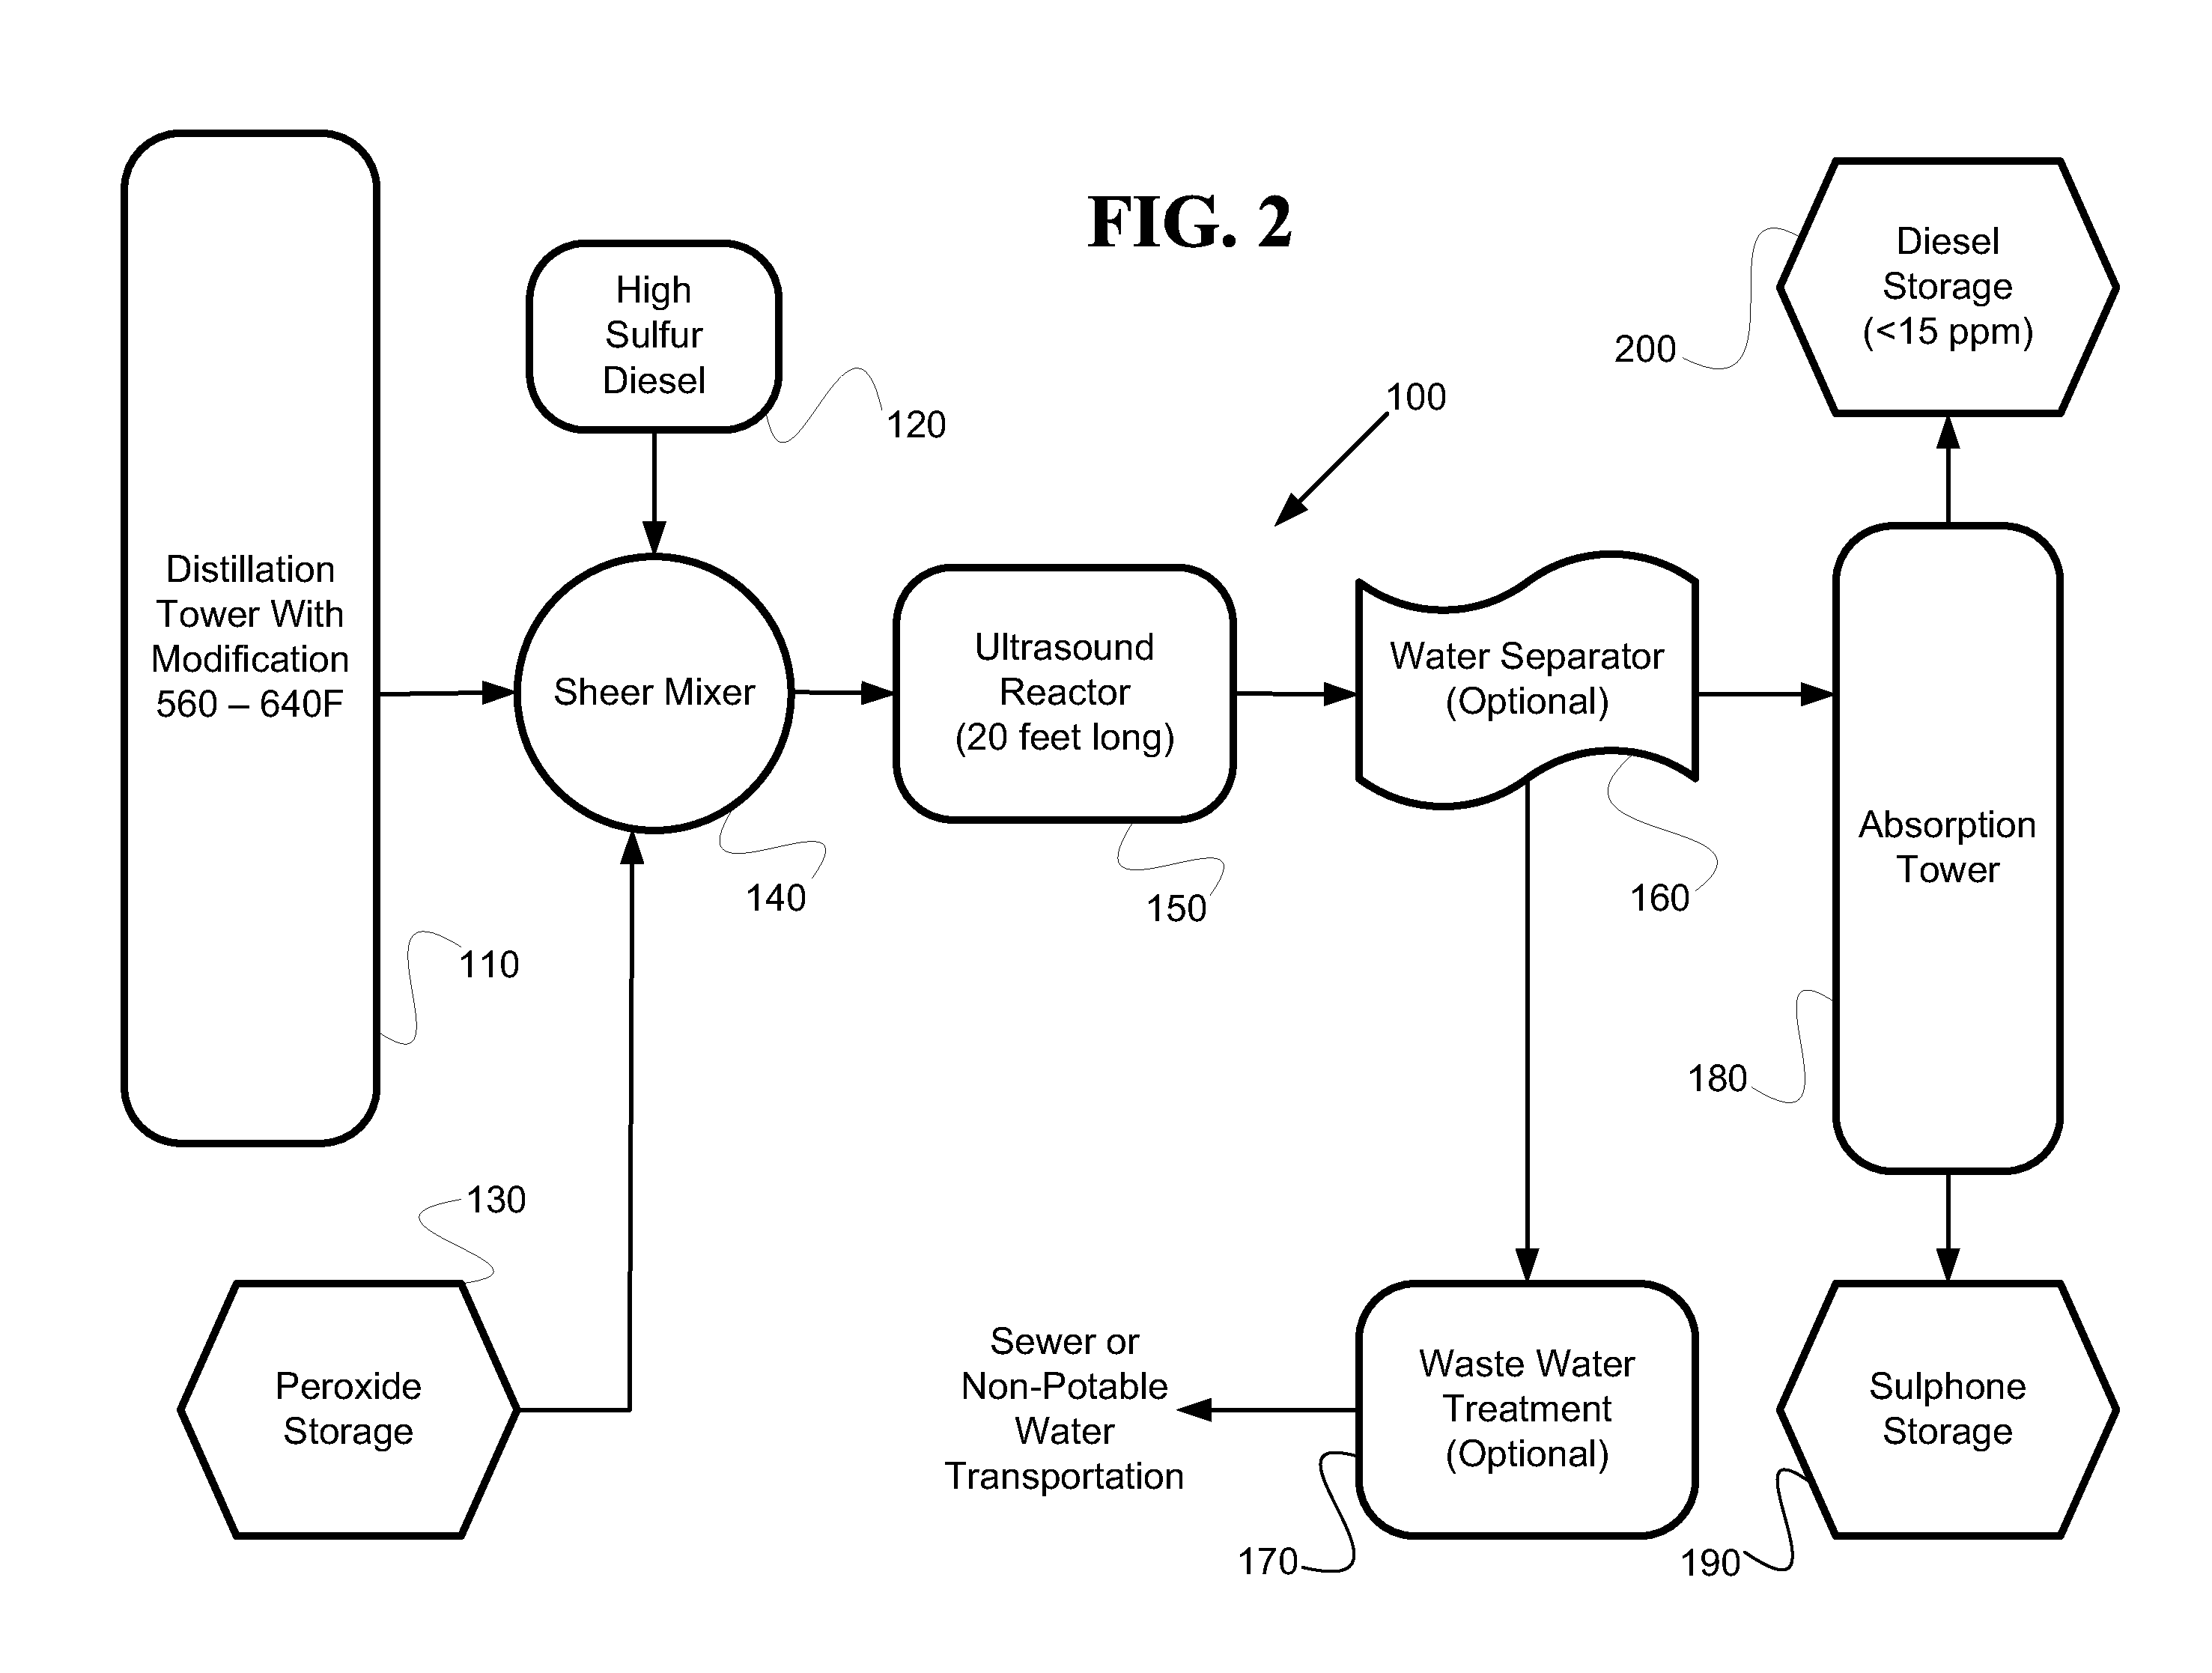 Process for removing sulfur from hydrocarbon streams using hydrotreatment, fractionation and oxidation